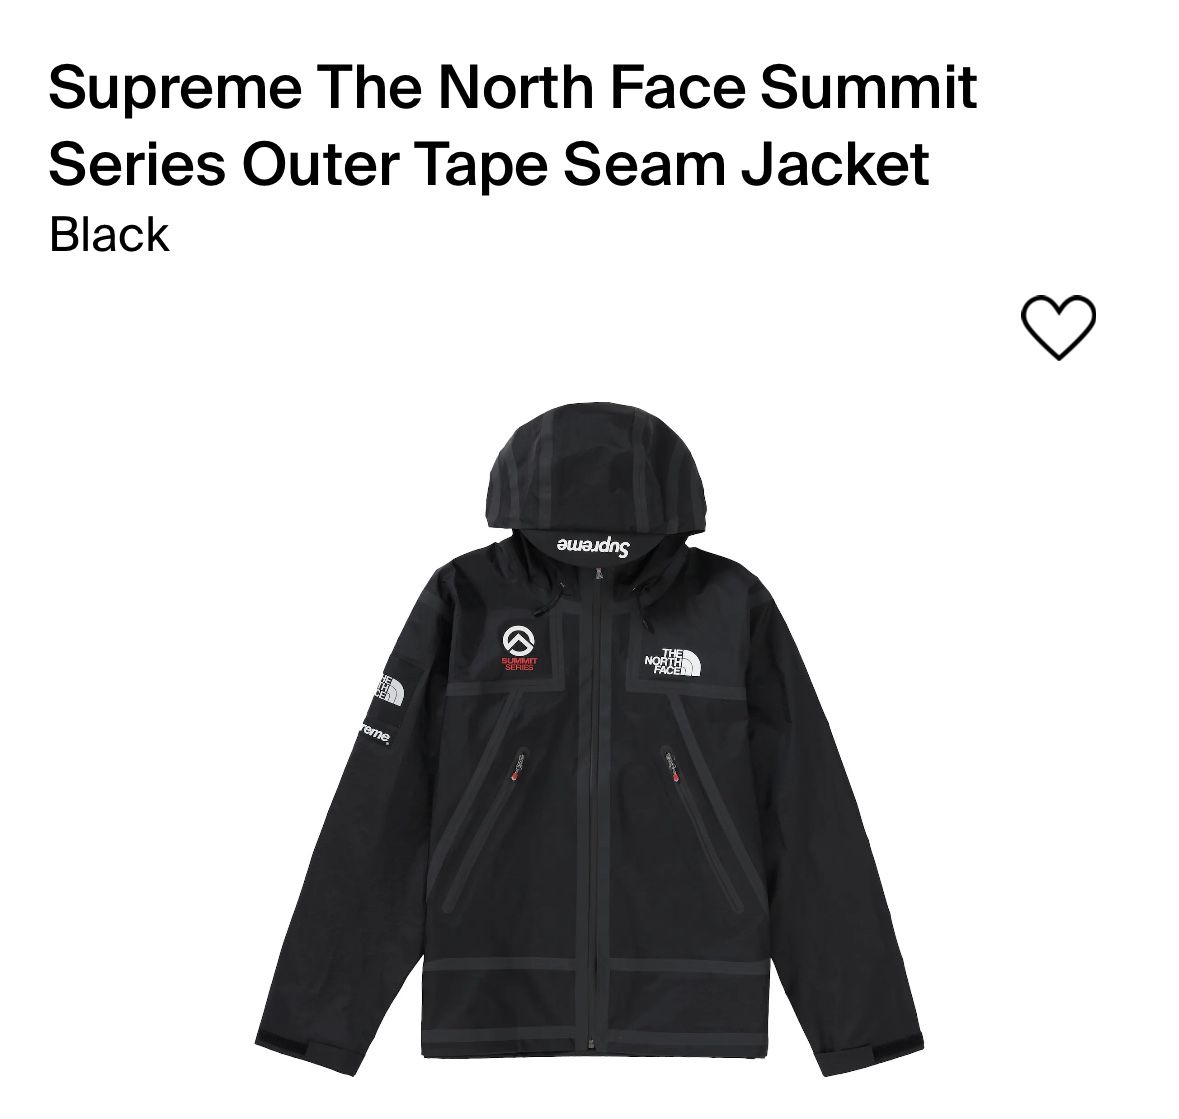 Supreme The North Face Summit Series Outer Tape Seam Jacket